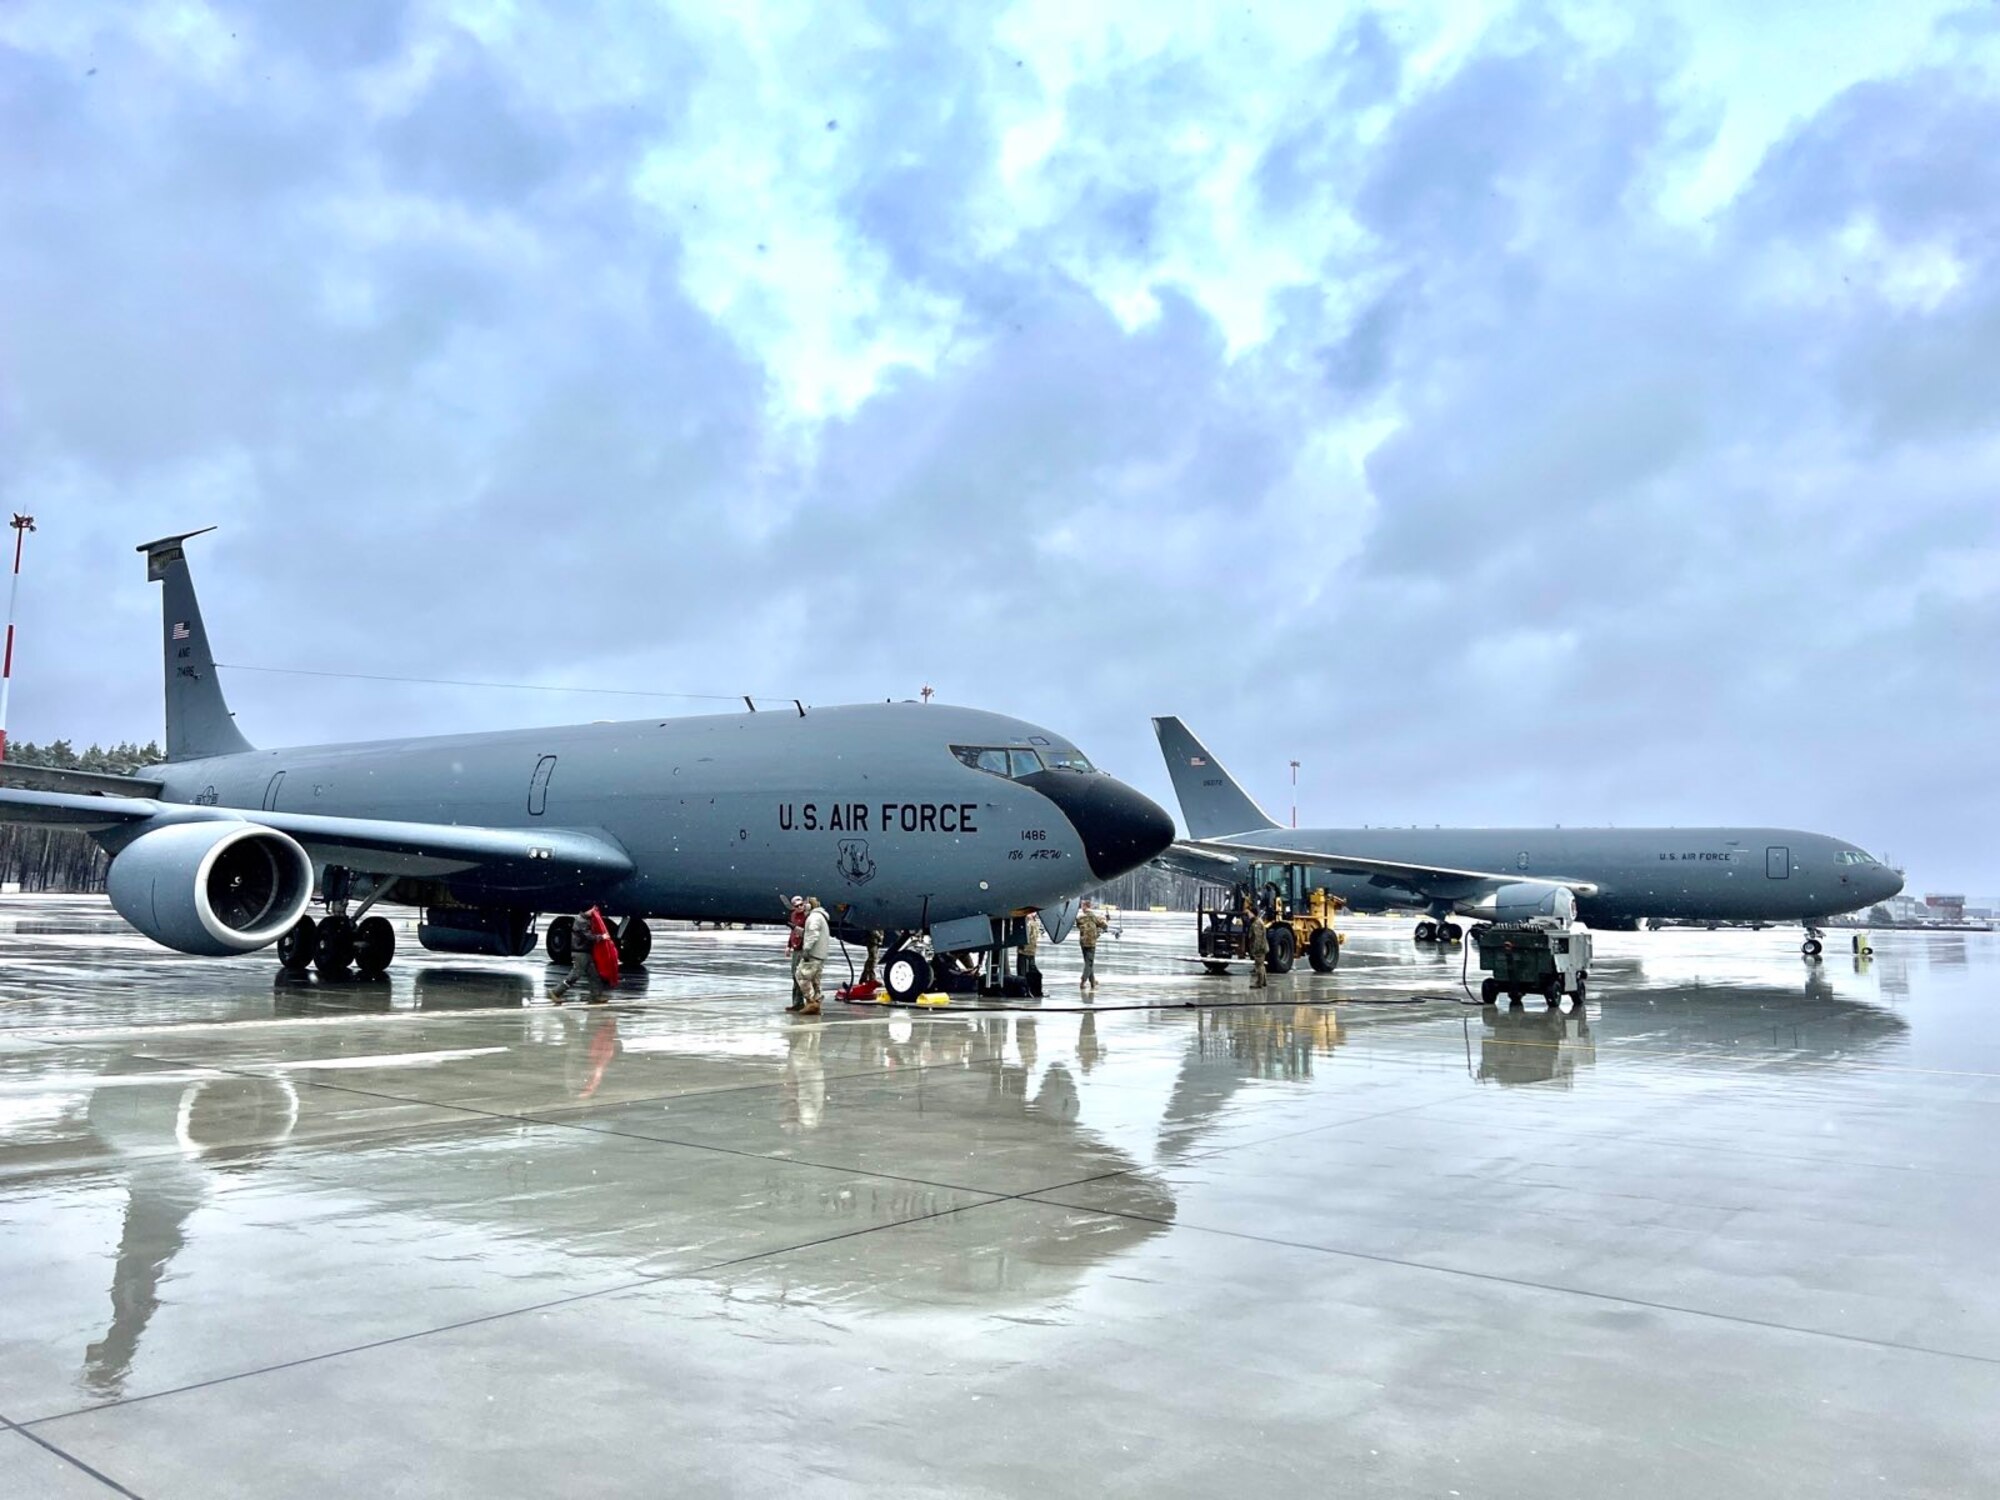 A U.S. KC-46A Pegasus tanker aircraft from the Air Force Reserve Command’s 514th Air Mobility Wing, primarily stationed at McGuire Air Force Base, N.J., and a U.S. KC-135 Stratotanker from the 186th Air Refueling Wing, part of the Mississippi Air National Guard, sit on the runway at Powidz Air Base, Poland, March 16, 2023.